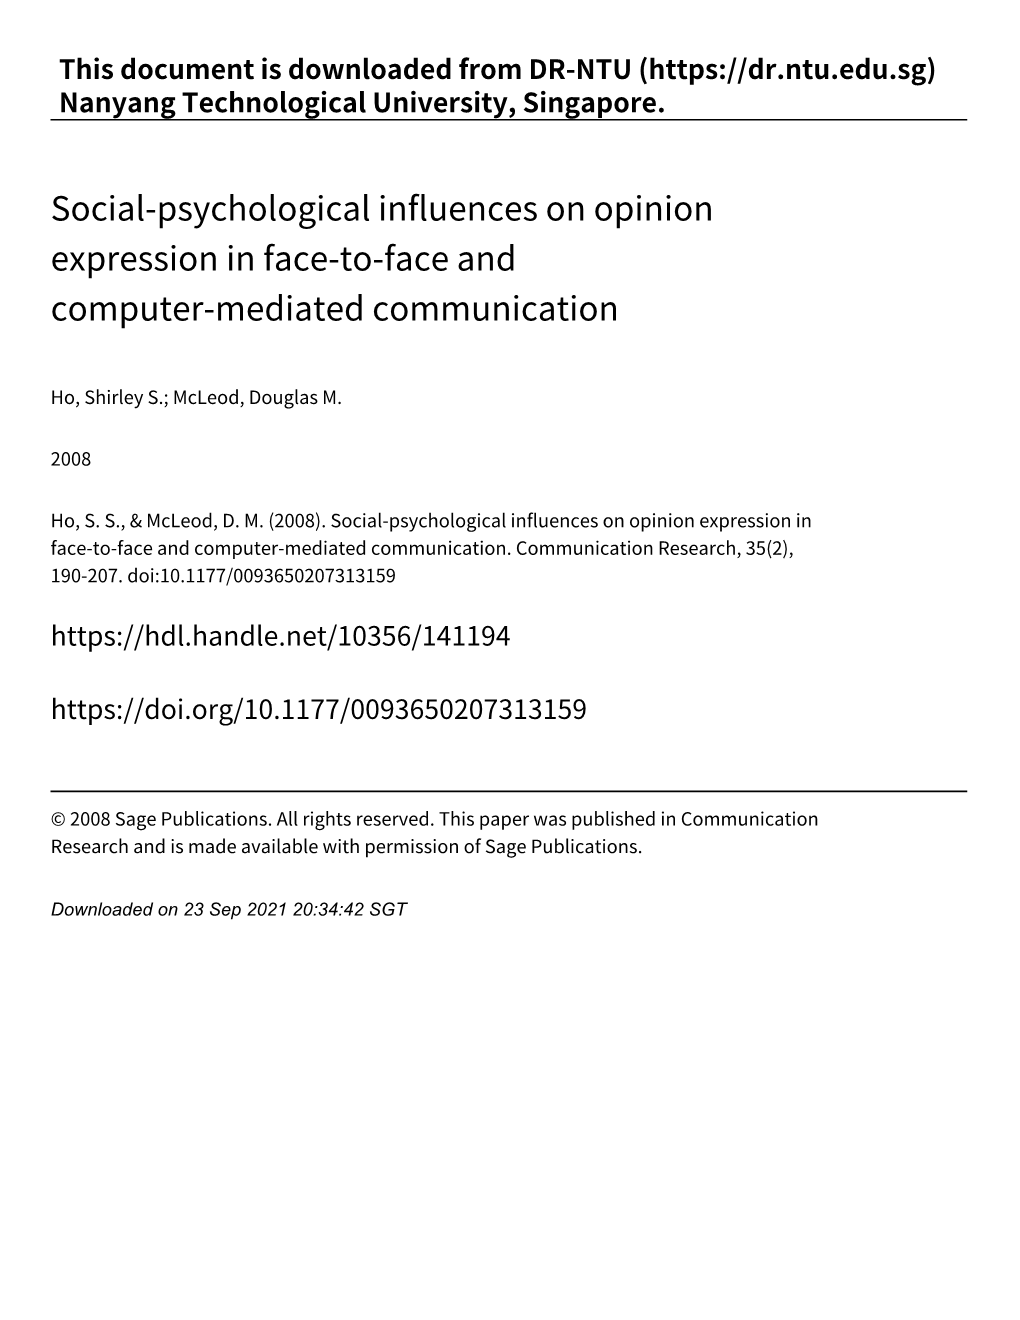 Social‑Psychological Influences on Opinion Expression in Face‑To‑Face and Computer‑Mediated Communication